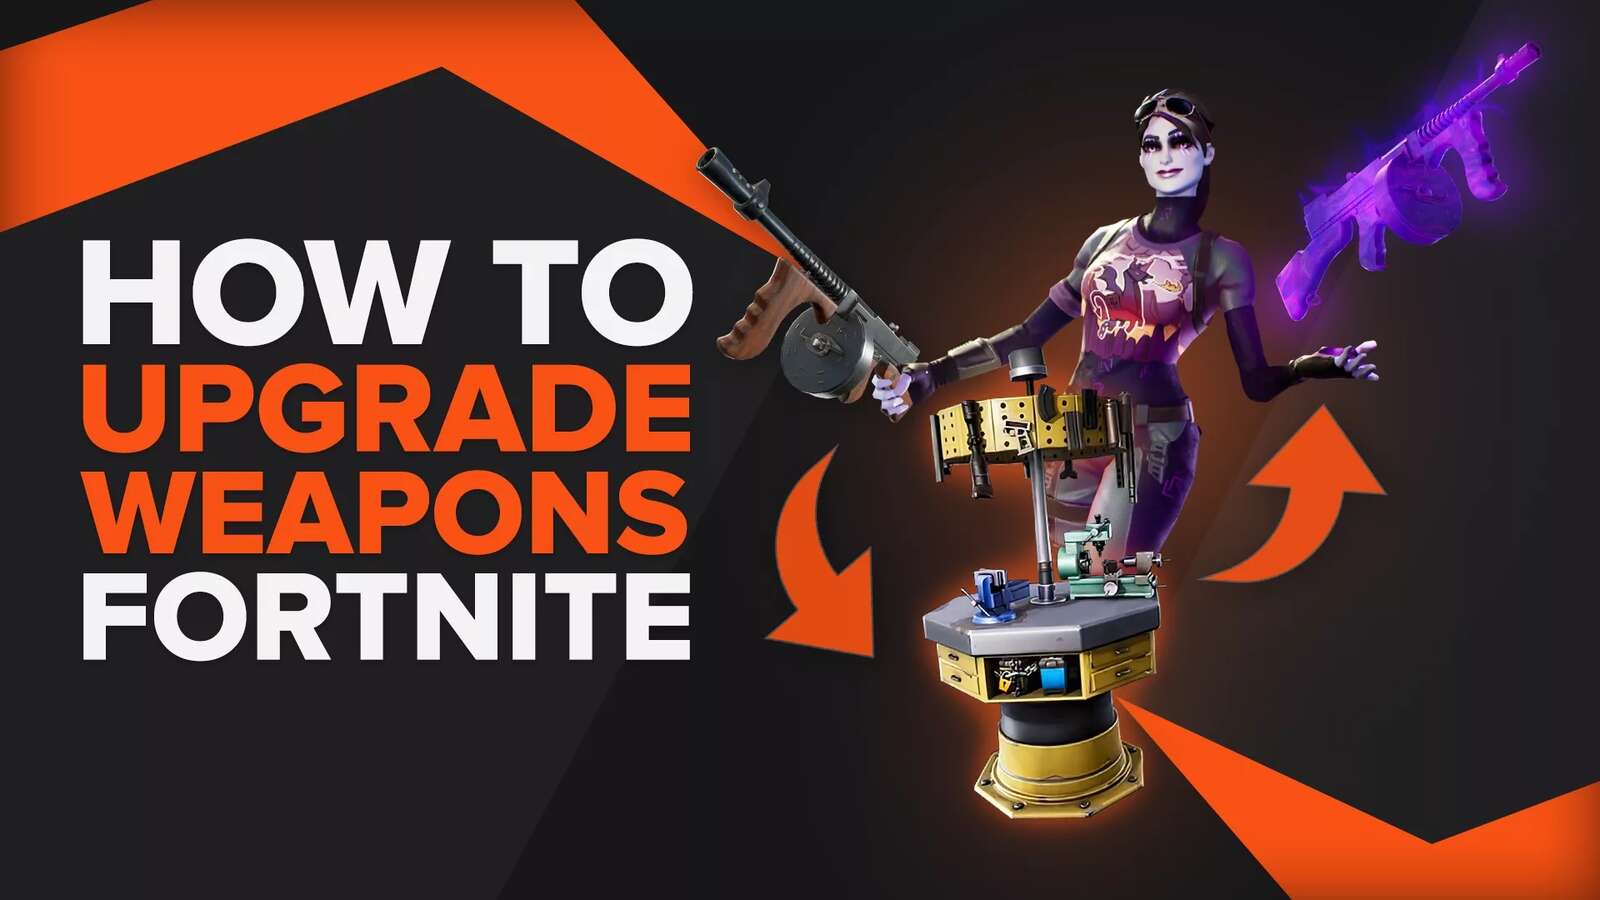 Where to Upgrade Weapons in Fortnite & How To Do It